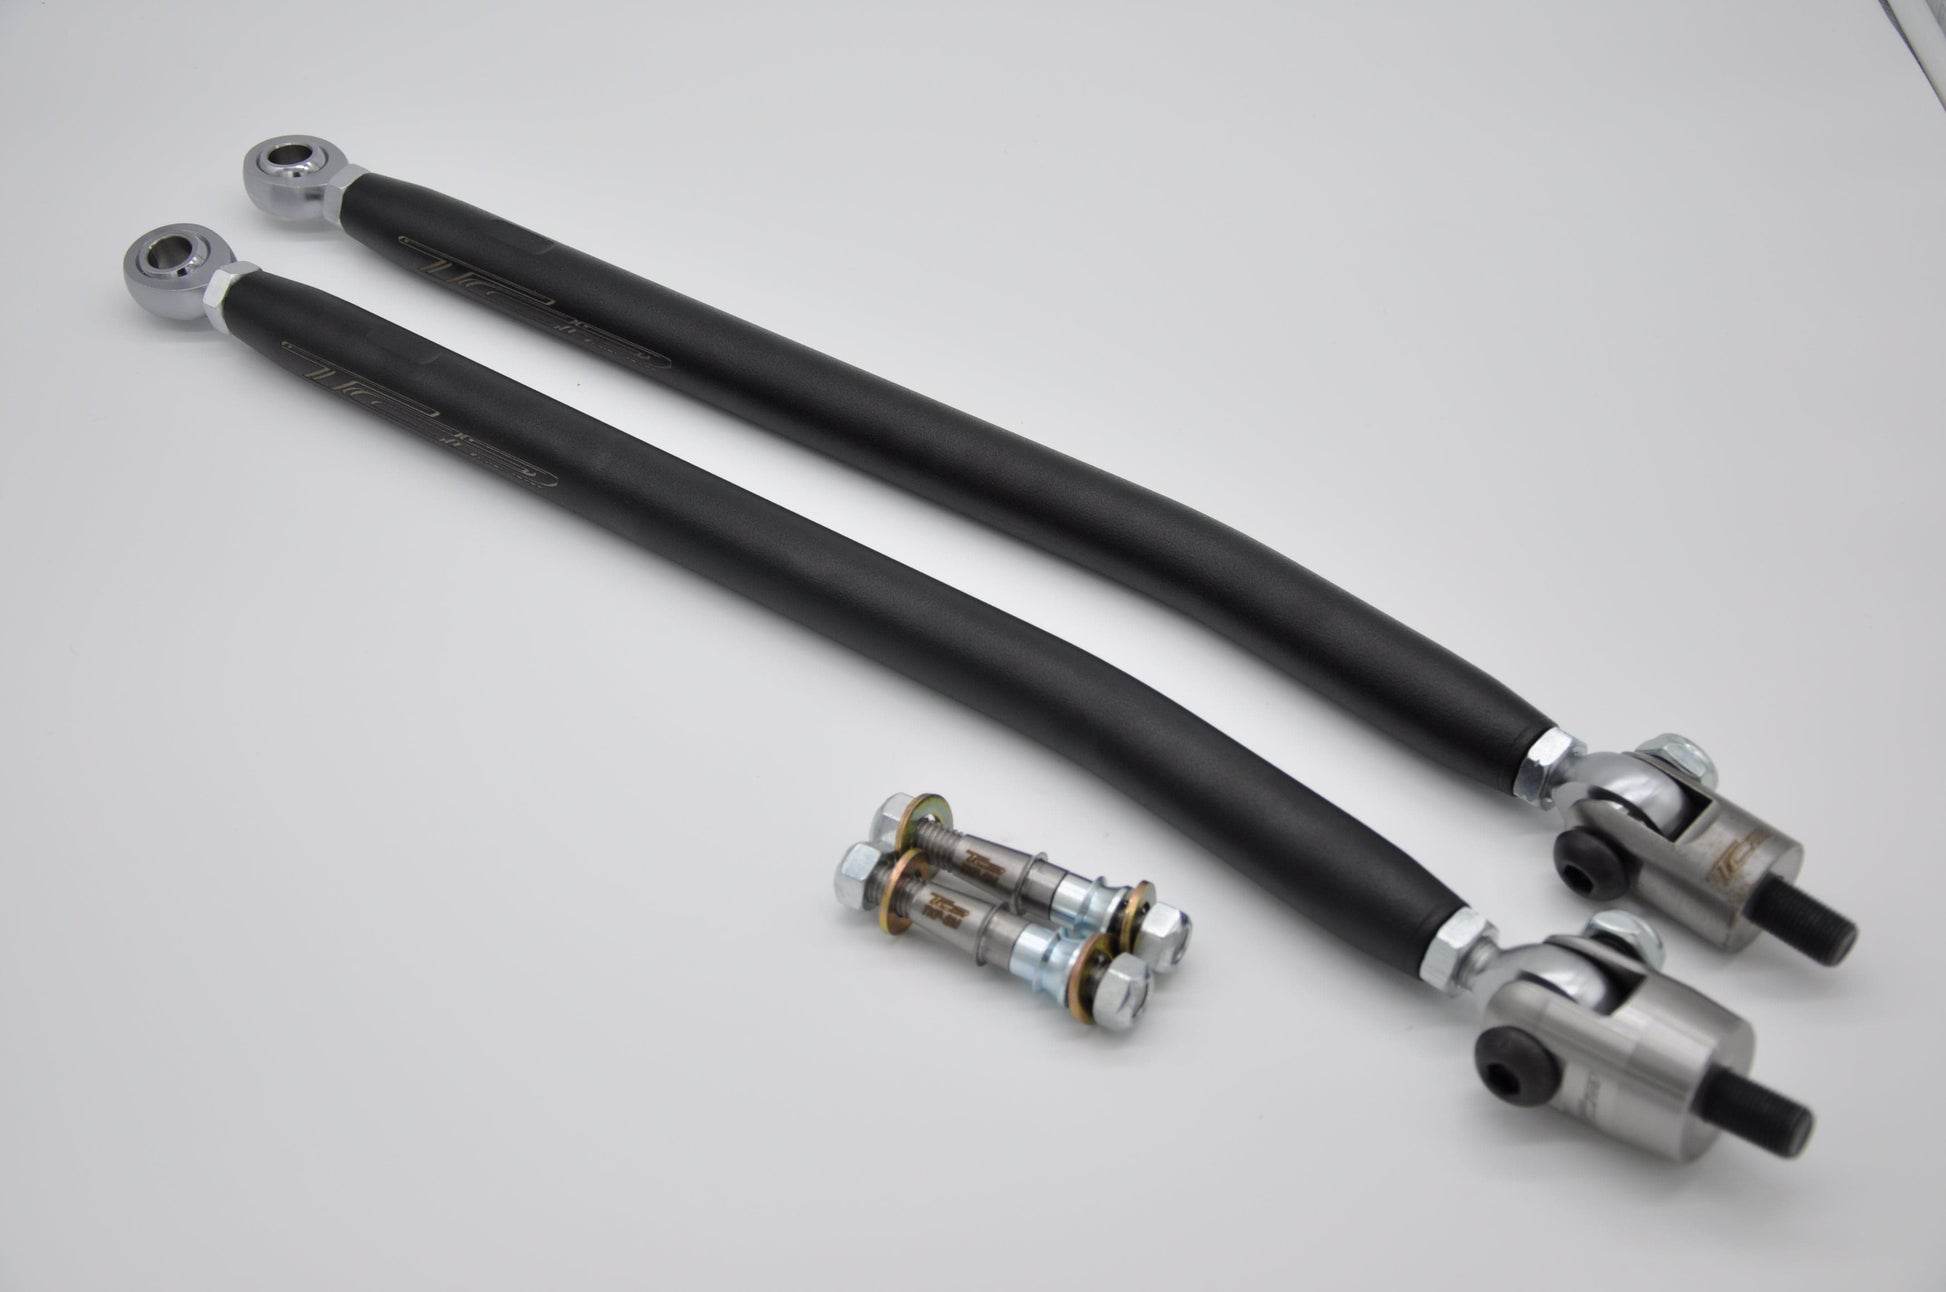 Heavy Duty Tie Rods, Rod Ends, Clevises, and Tapered King Pins for 2016 Polaris RZR XP Turbo with SATV +10 Lift